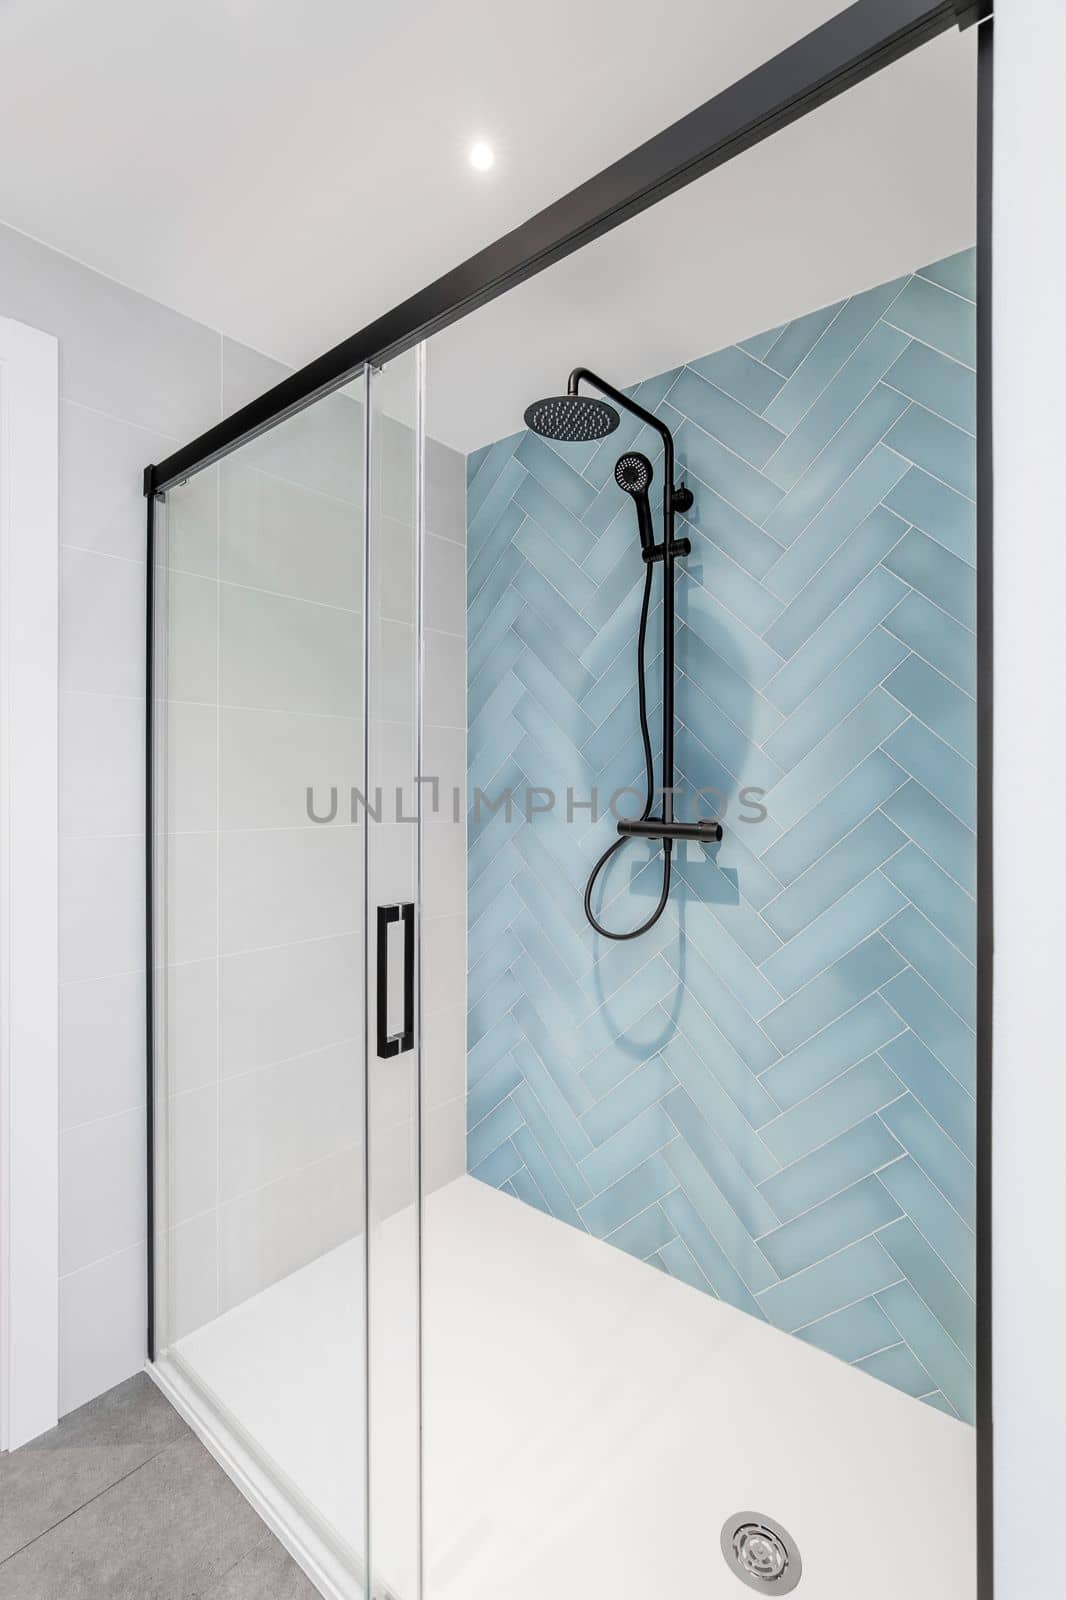 White bathroom with glass shower, walls are decorated with herringbone tiles in pale blue. Black shower system enclosure with dark matte framed sliding glass door. Bright modern and stylish bathroom by apavlin